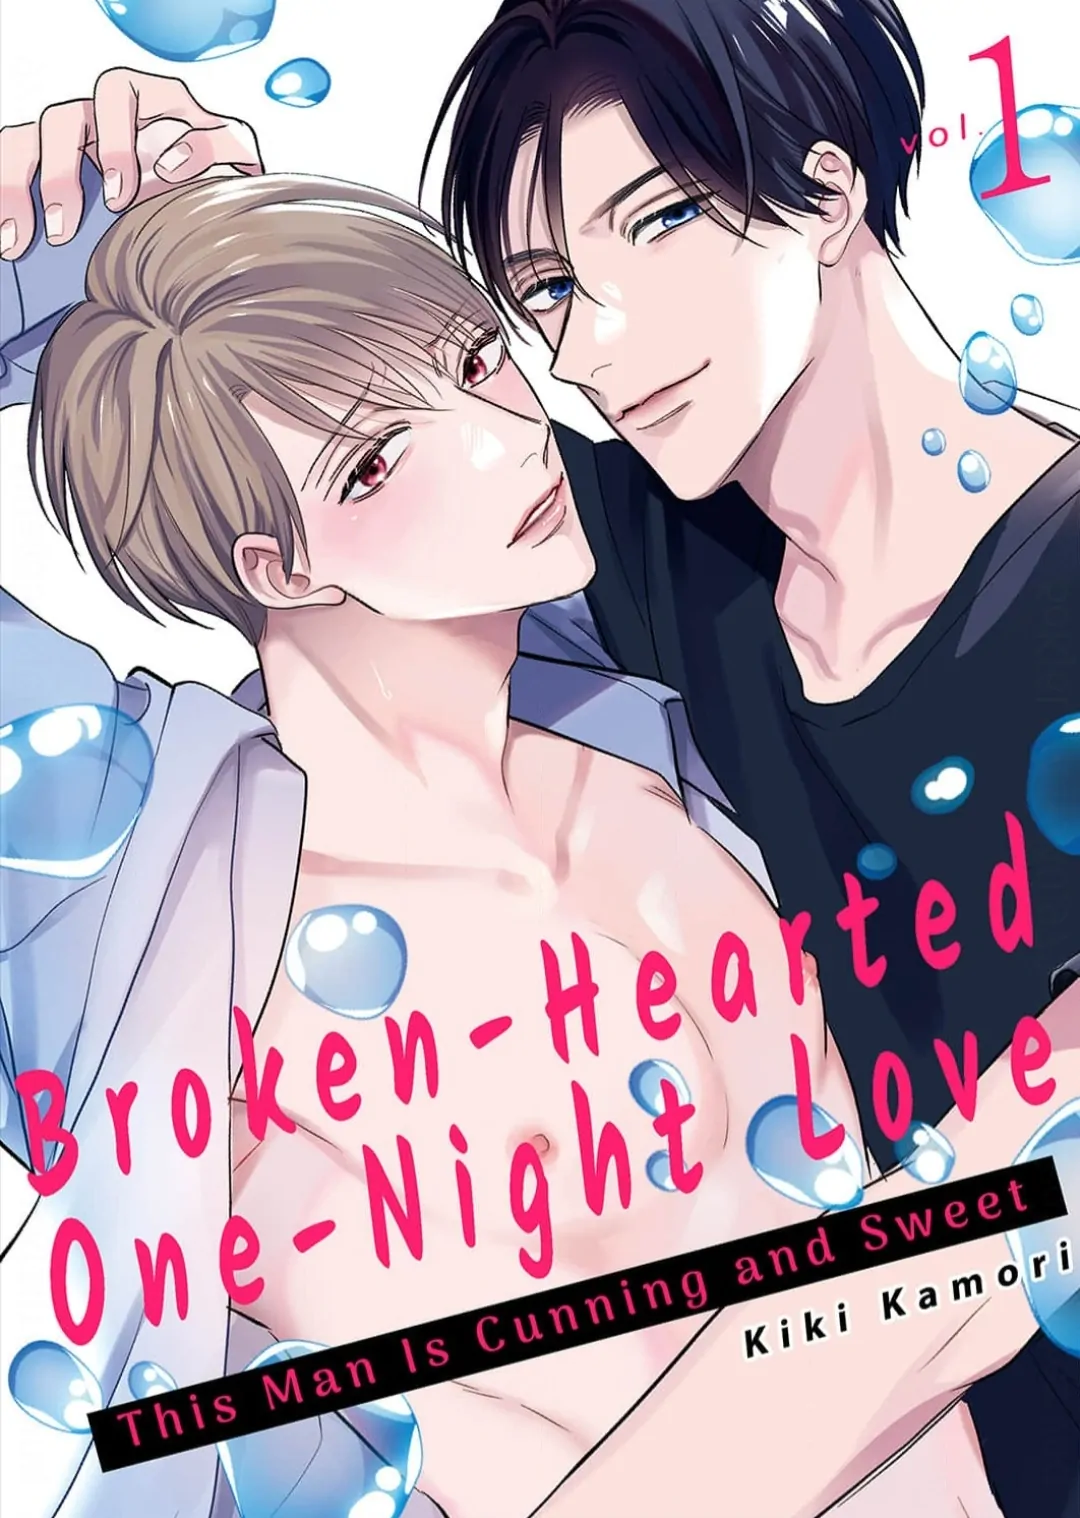 Broken-Hearted One-Night Love ~This Man Is Cunning and Sweet~ - chapter 1 - #1